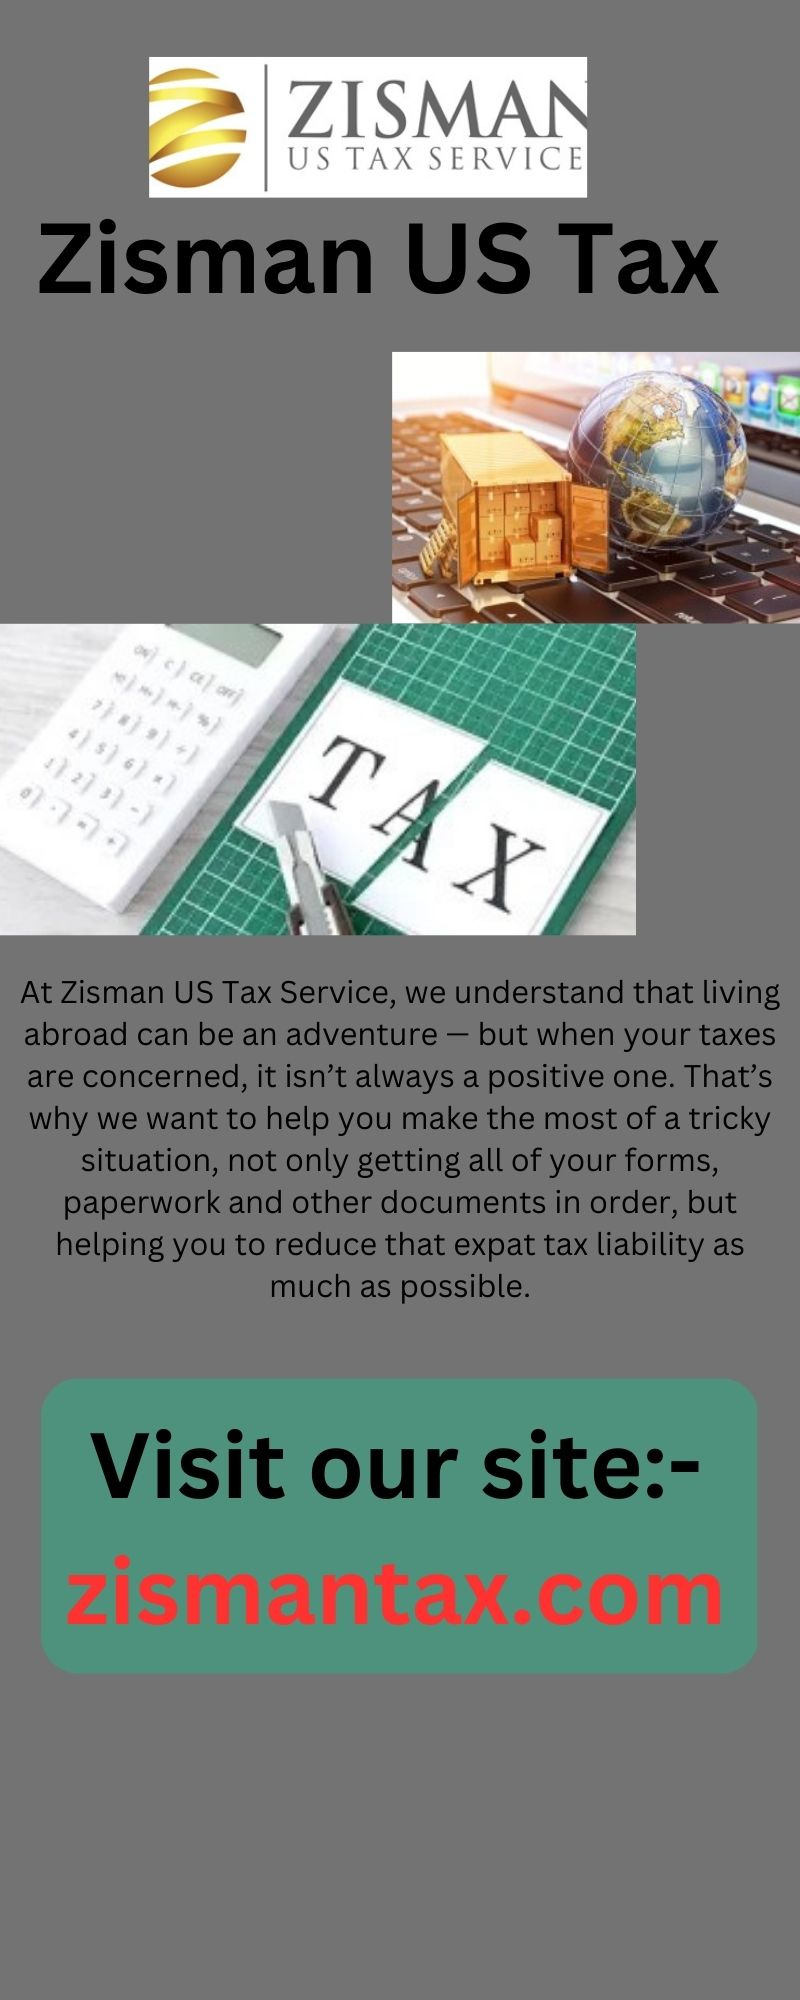 Browsing The Best Free Tax Filing Service by Zisman US Tax on Dribbble